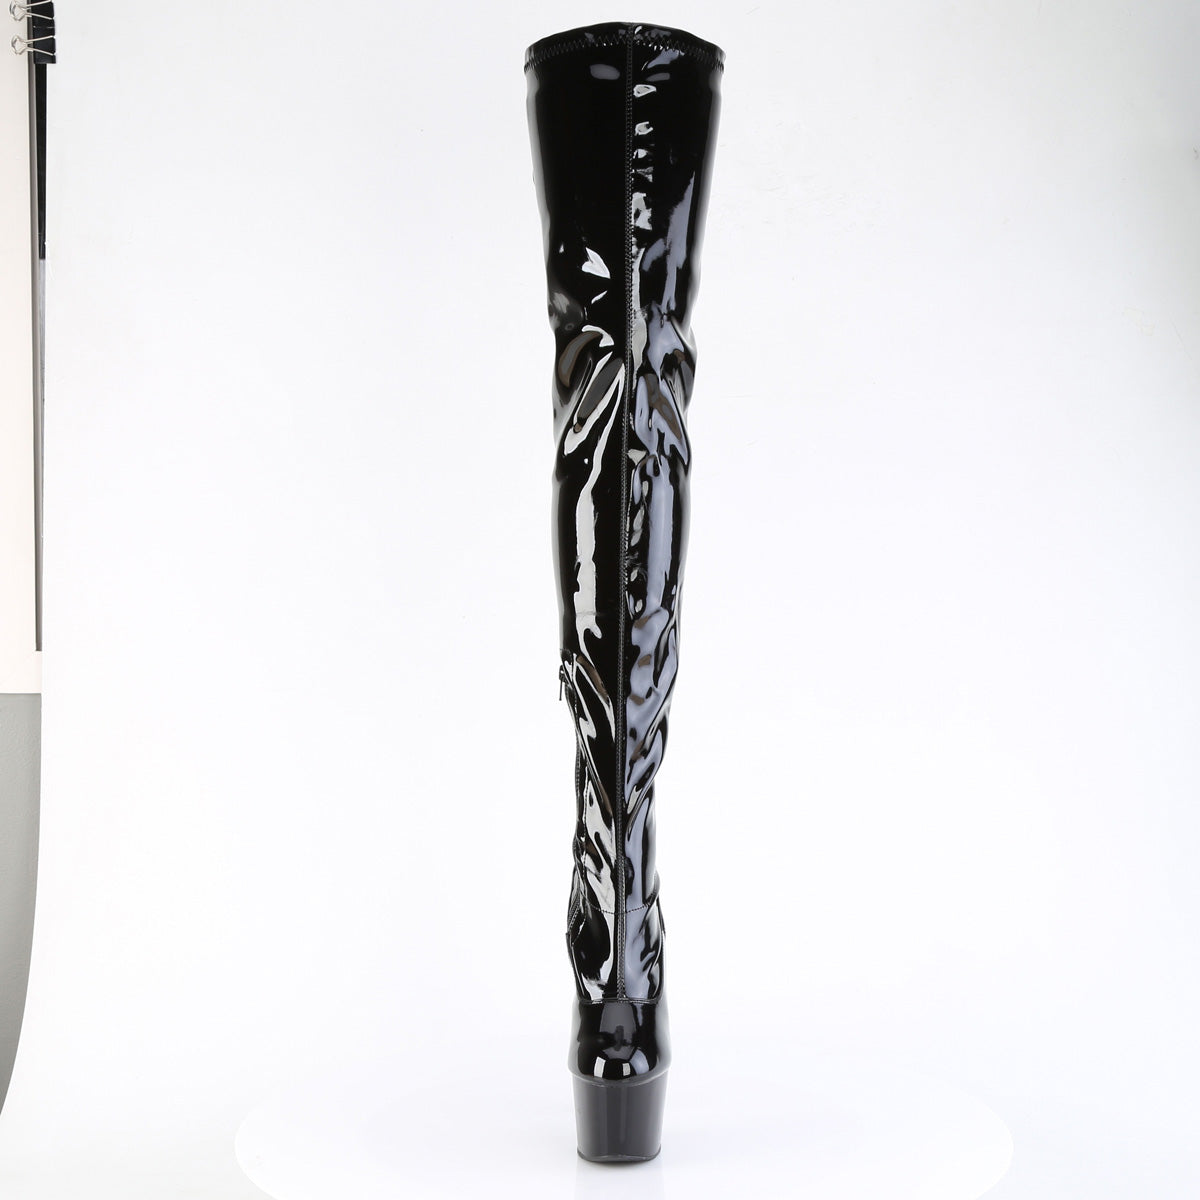 ADORE-4000SLT Pleaser Black Patent Pole Dancing Crotch High Kinky Boots